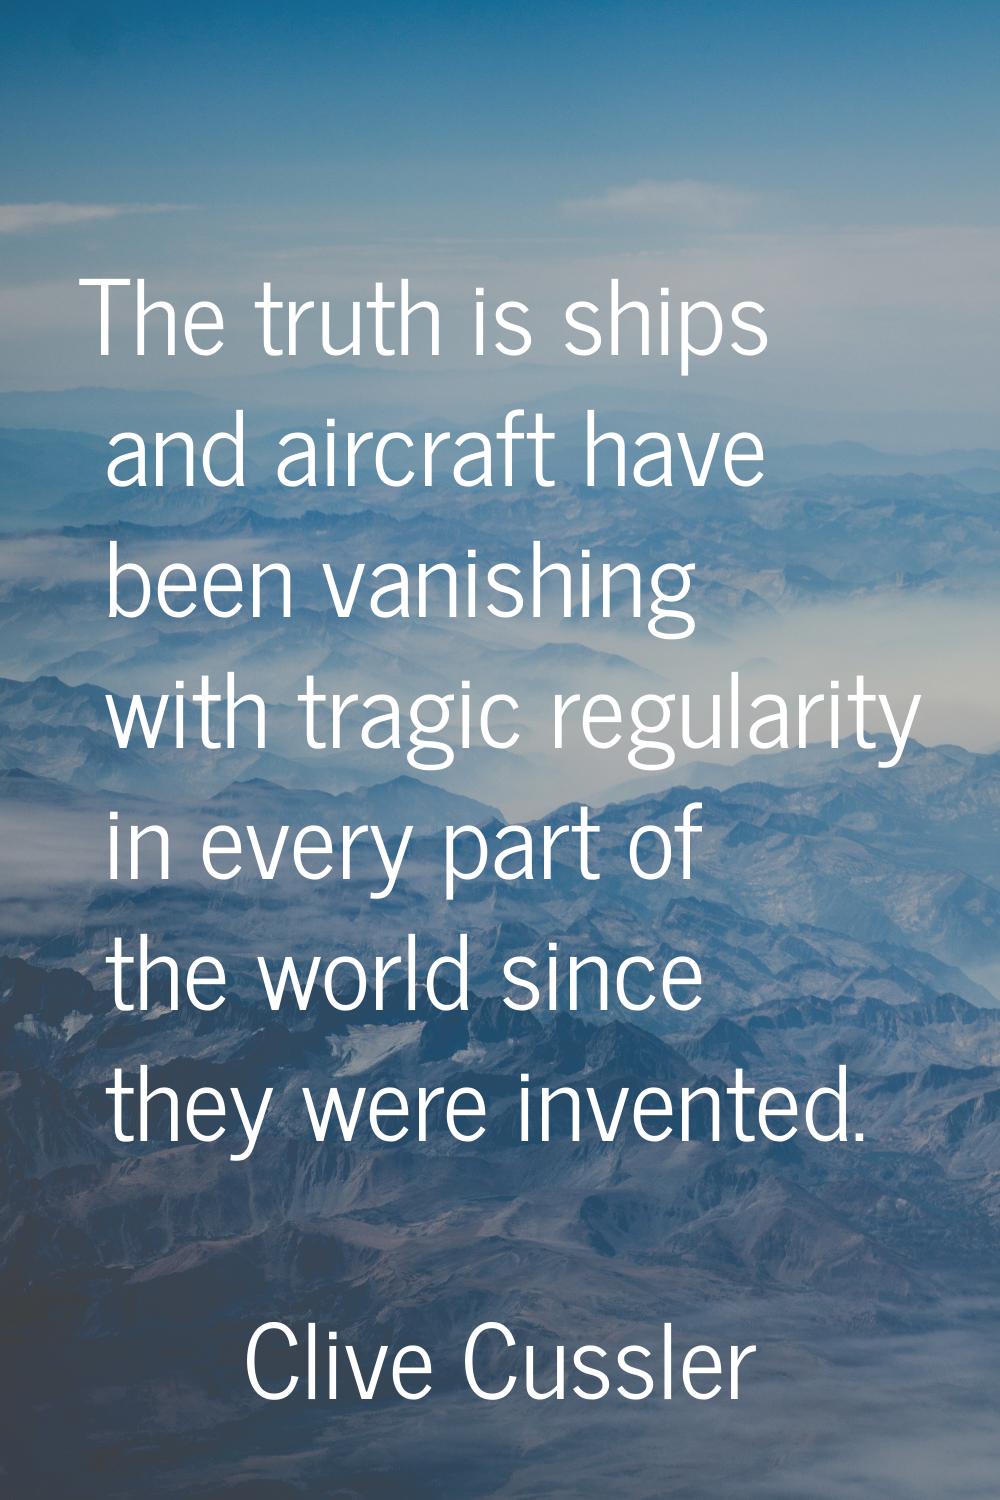 The truth is ships and aircraft have been vanishing with tragic regularity in every part of the wor